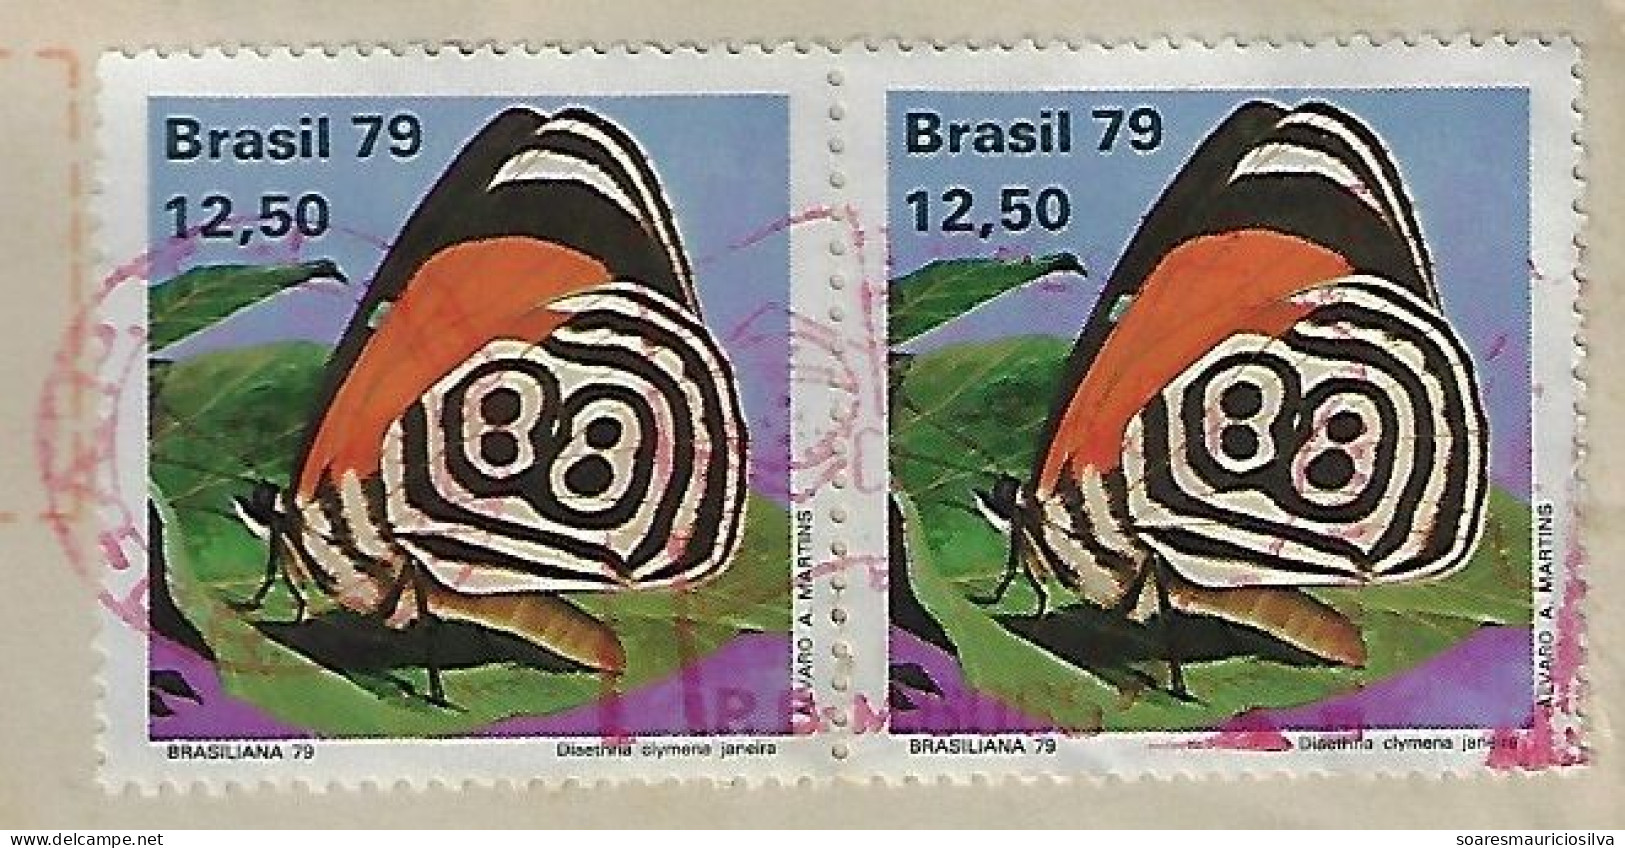 Brazil 1979 Registered Cover From Lages To Blumenau Pair Of Stamp Cramer's 88 Butterfly Insect Cancelled By Meter Stamp - Cartas & Documentos